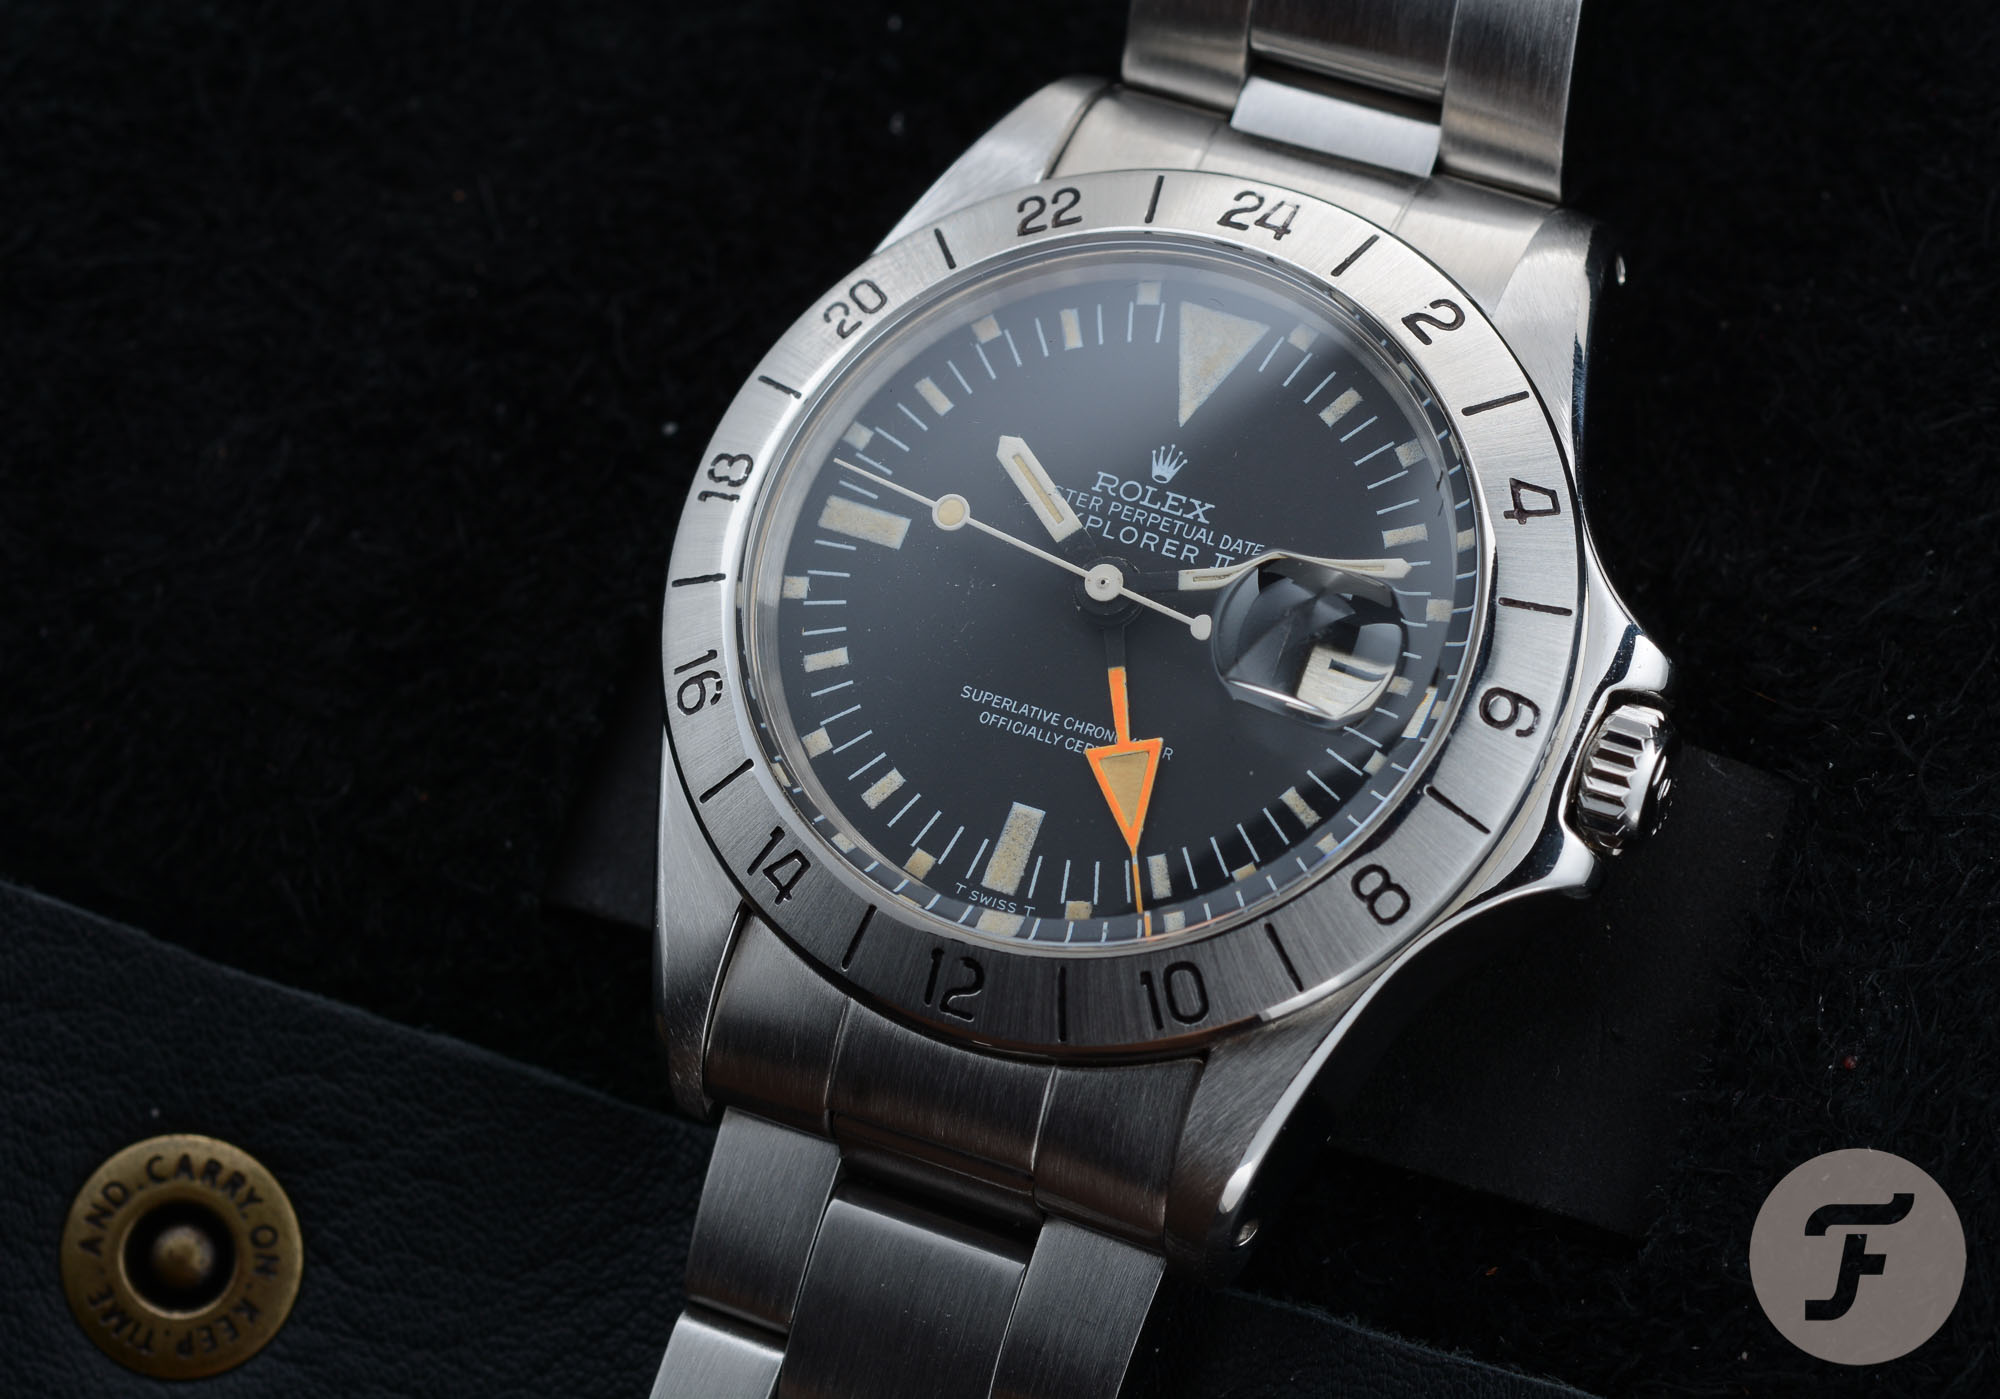 Hurtig intelligens Hong Kong The Ultimate Sports Rolex - The Explorer II Reference 1655